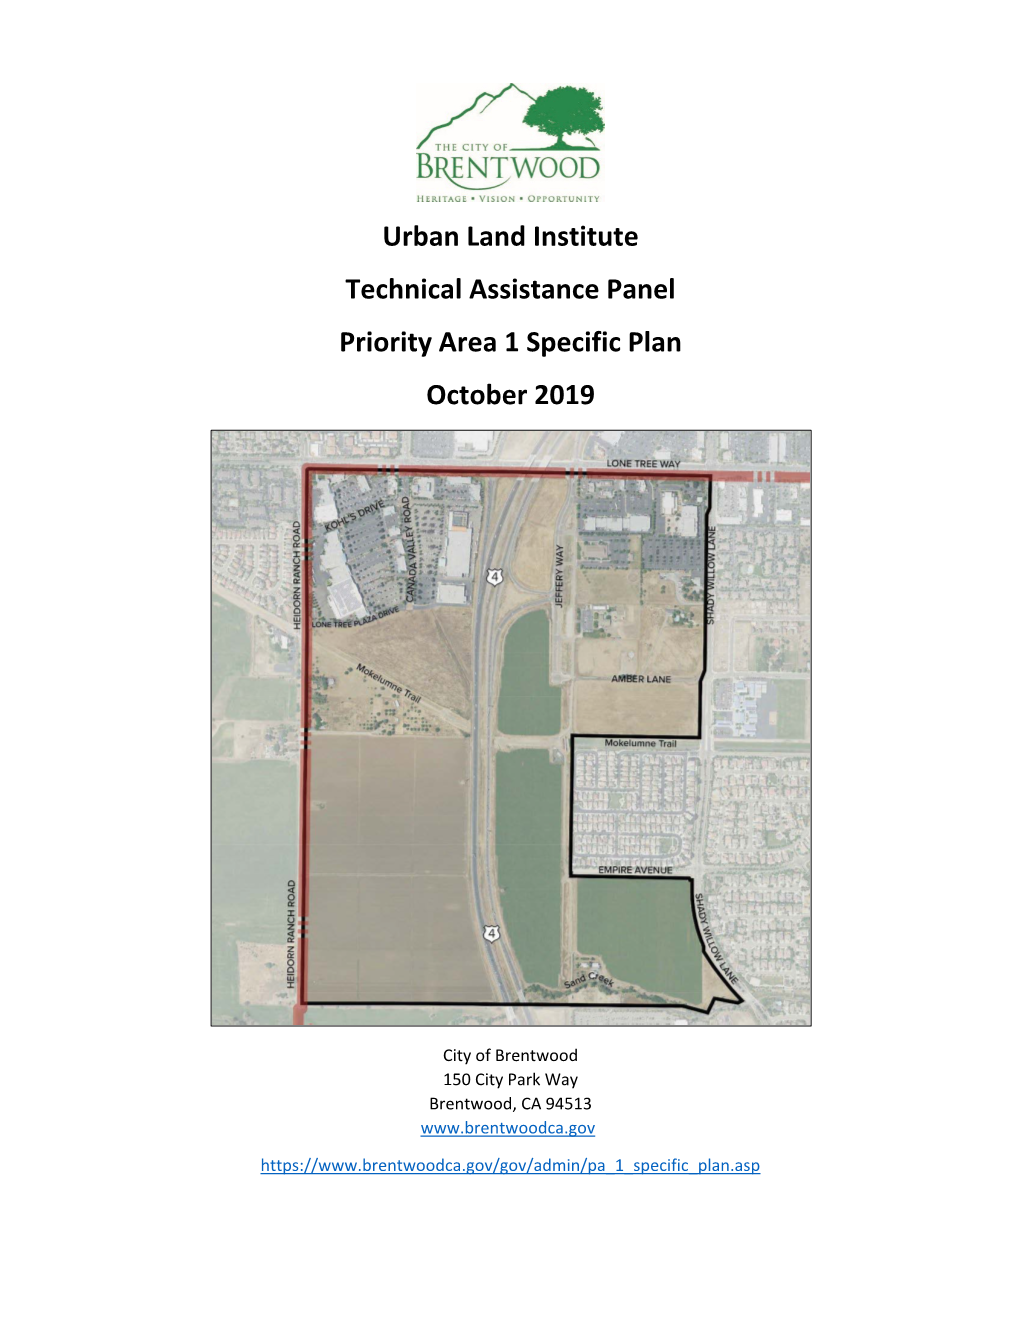 Urban Land Institute Technical Assistance Panel Priority Area 1 Specific Plan October 2019